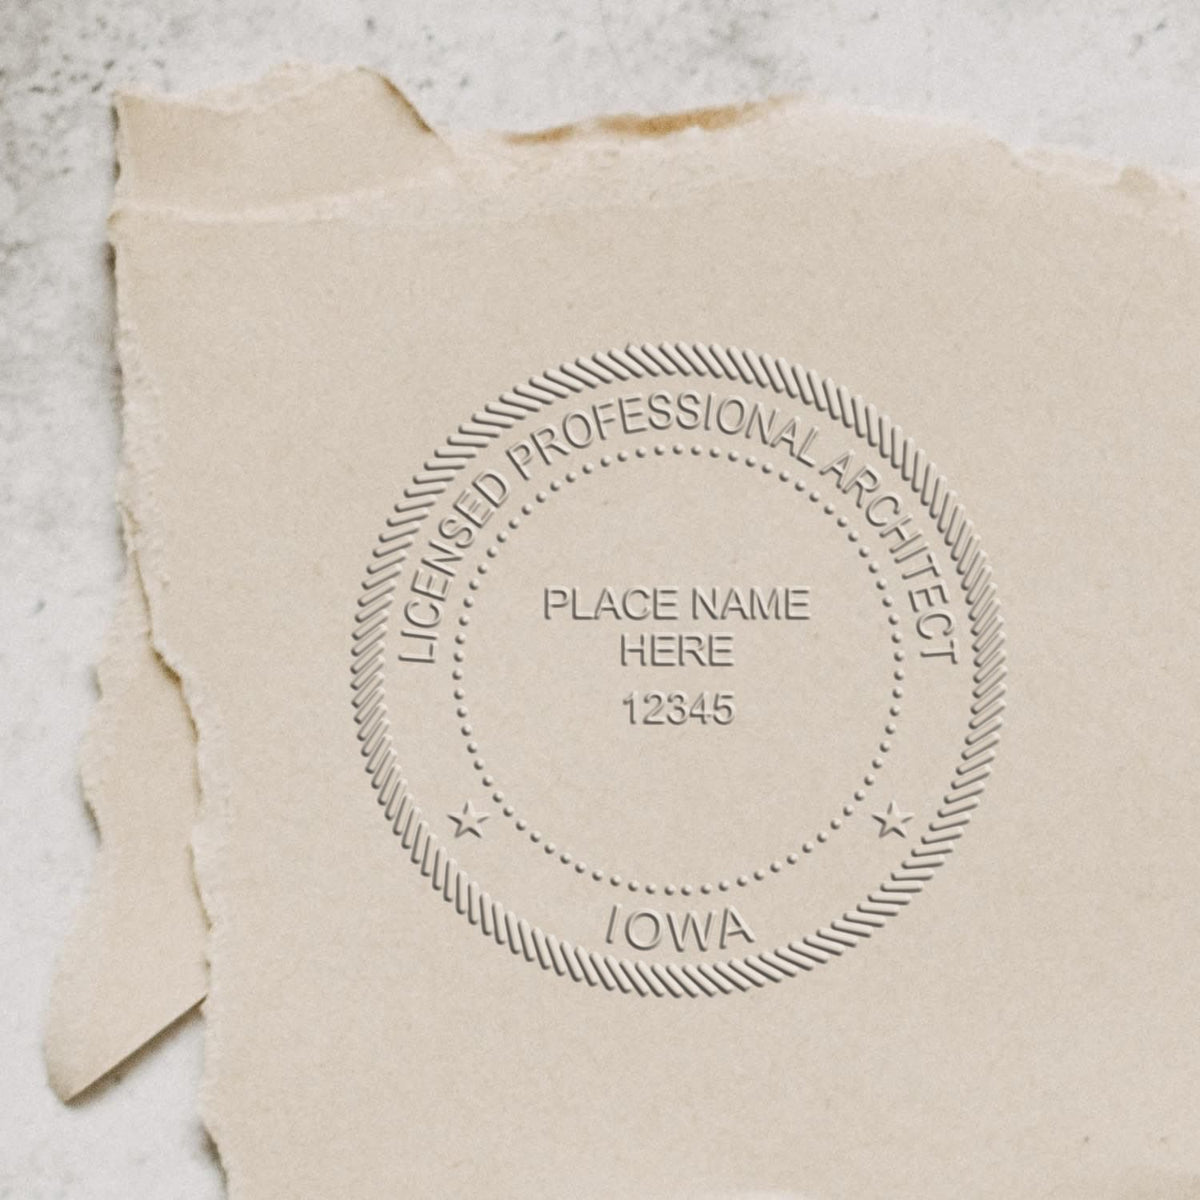 The State of Iowa Architectural Seal Embosser stamp impression comes to life with a crisp, detailed photo on paper - showcasing true professional quality.